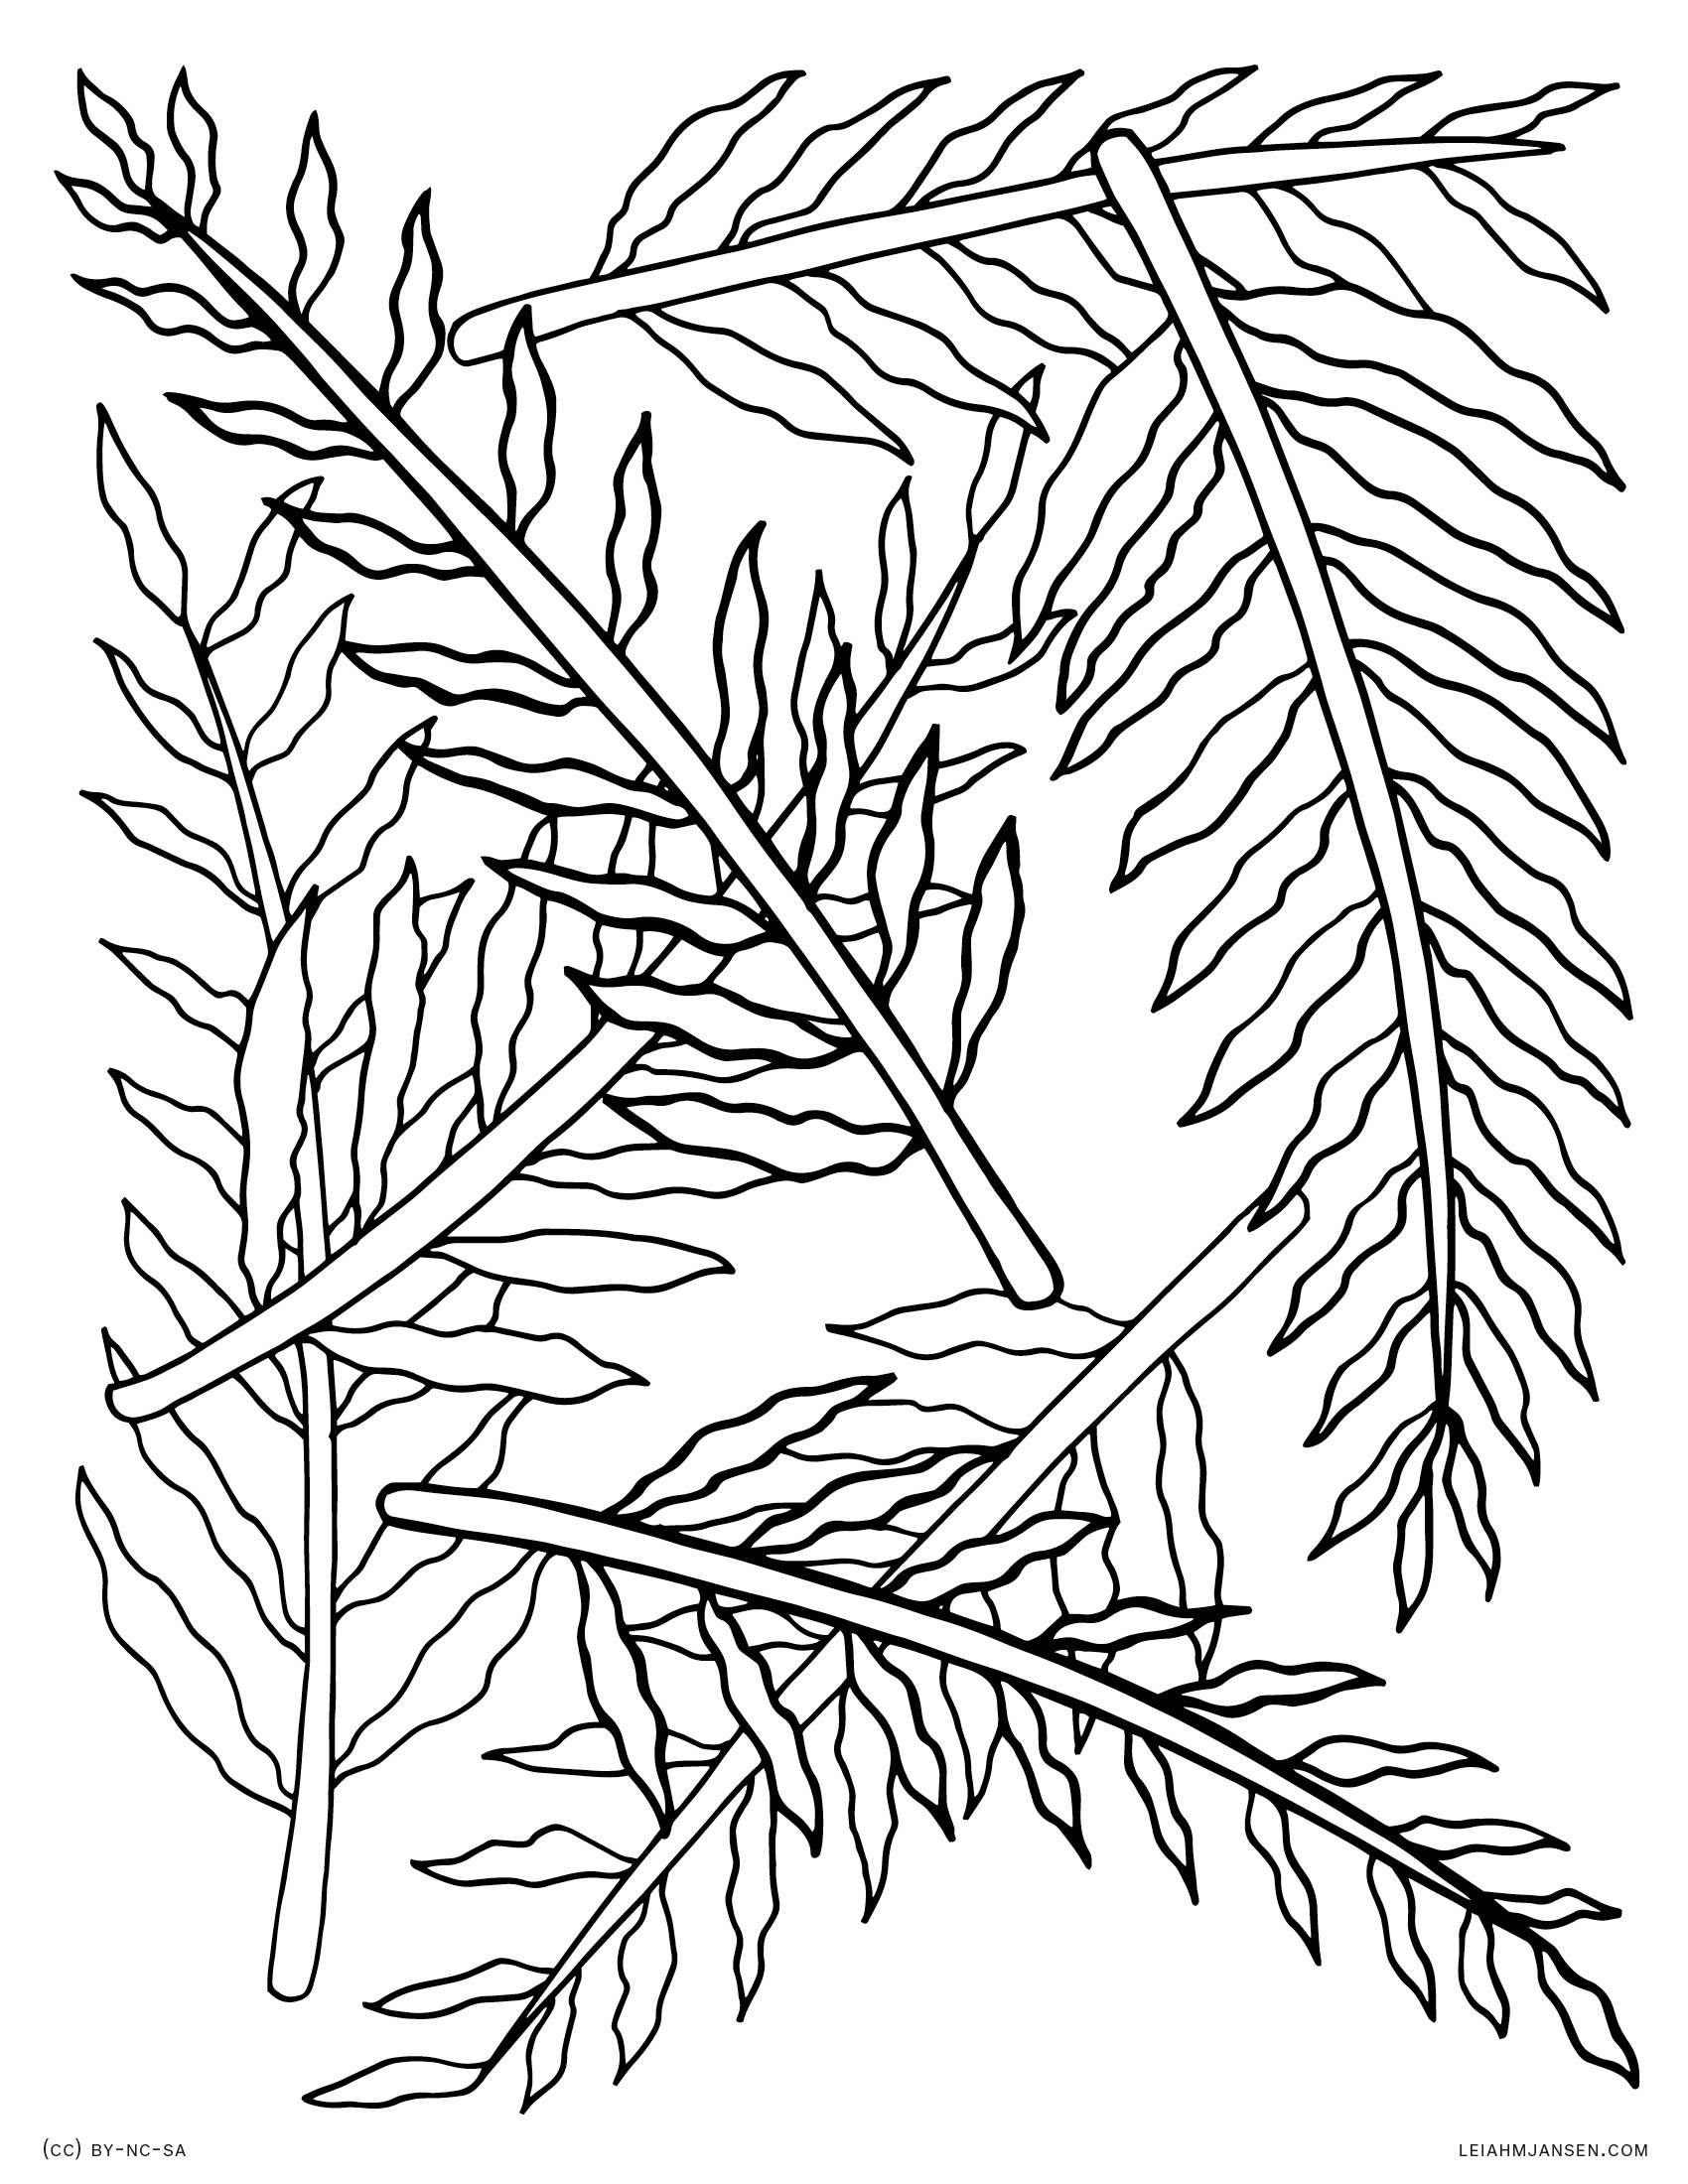 Fern Coloring Page at GetColorings.com | Free printable colorings pages